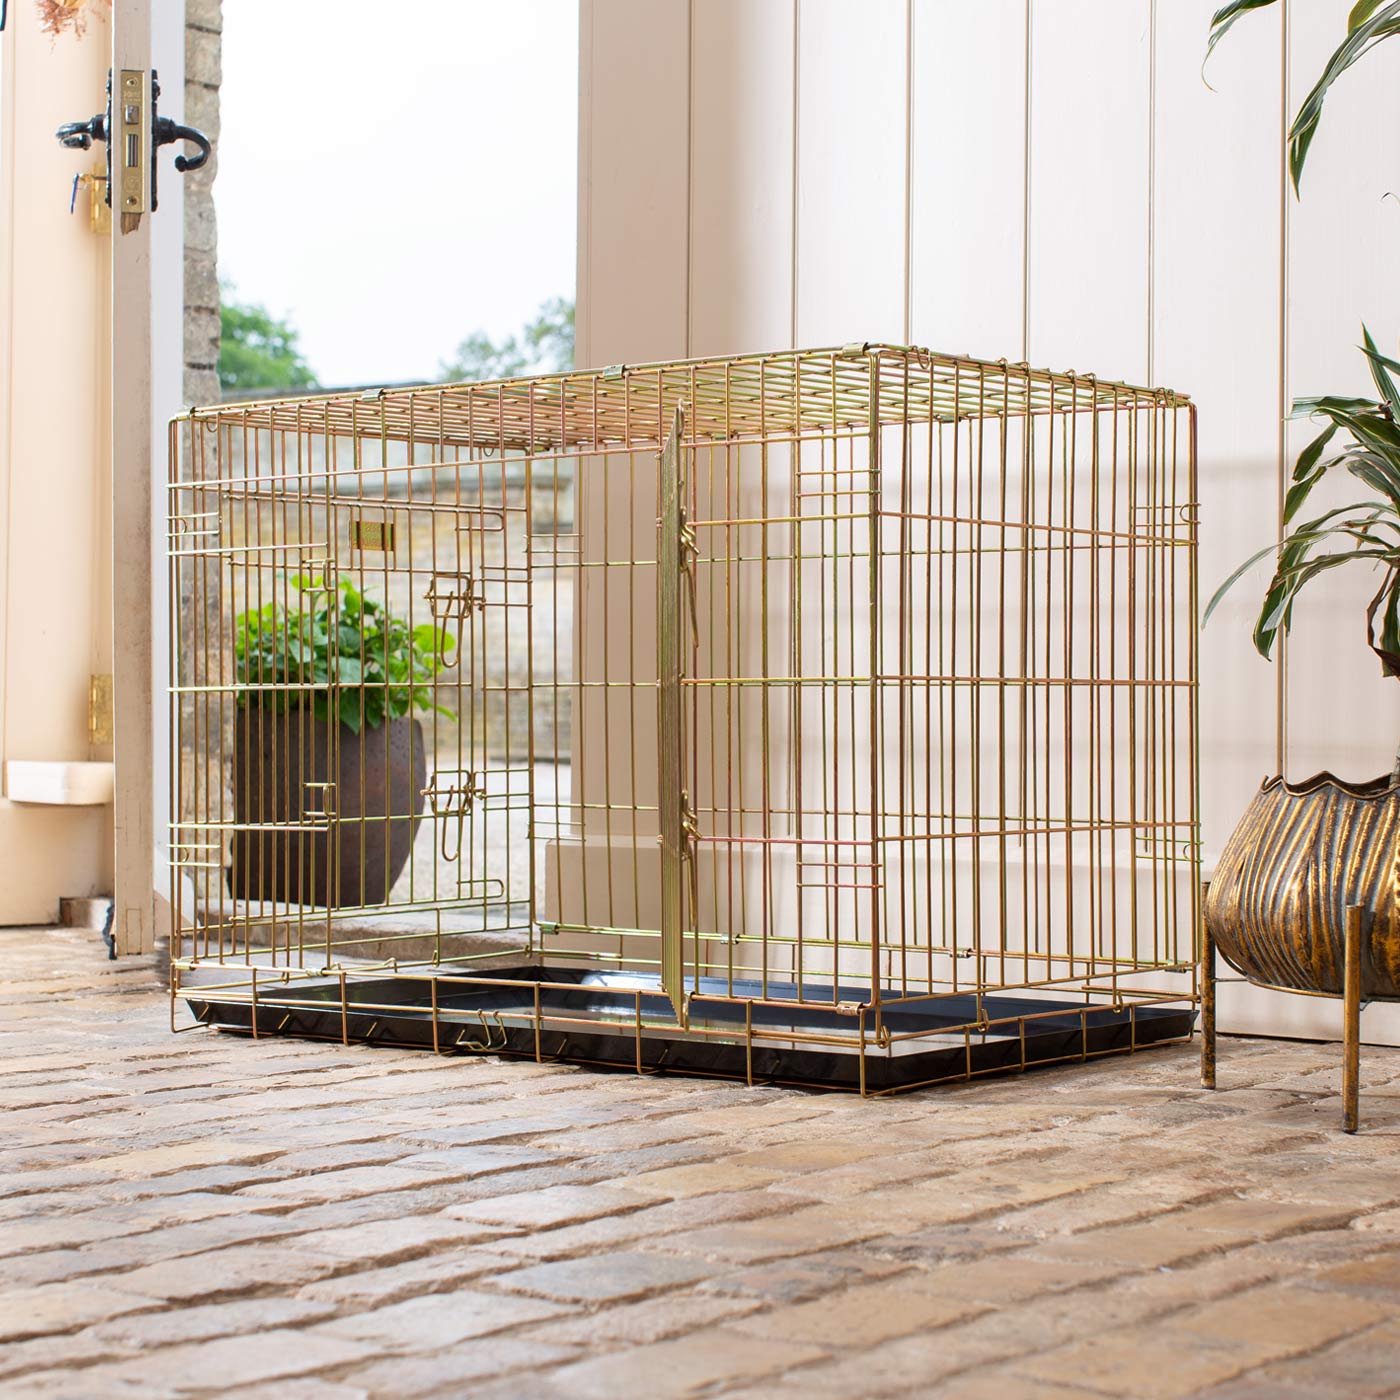 Discover the perfect deluxe heavy duty Gold dog cage, featuring two doors for easy access and a removable tray for easy cleaning! The ideal choice to keep new puppies safe, made using pet safe galvanised steel! Available now in 5 sizes and three stunning colors at Lords & Labradors US